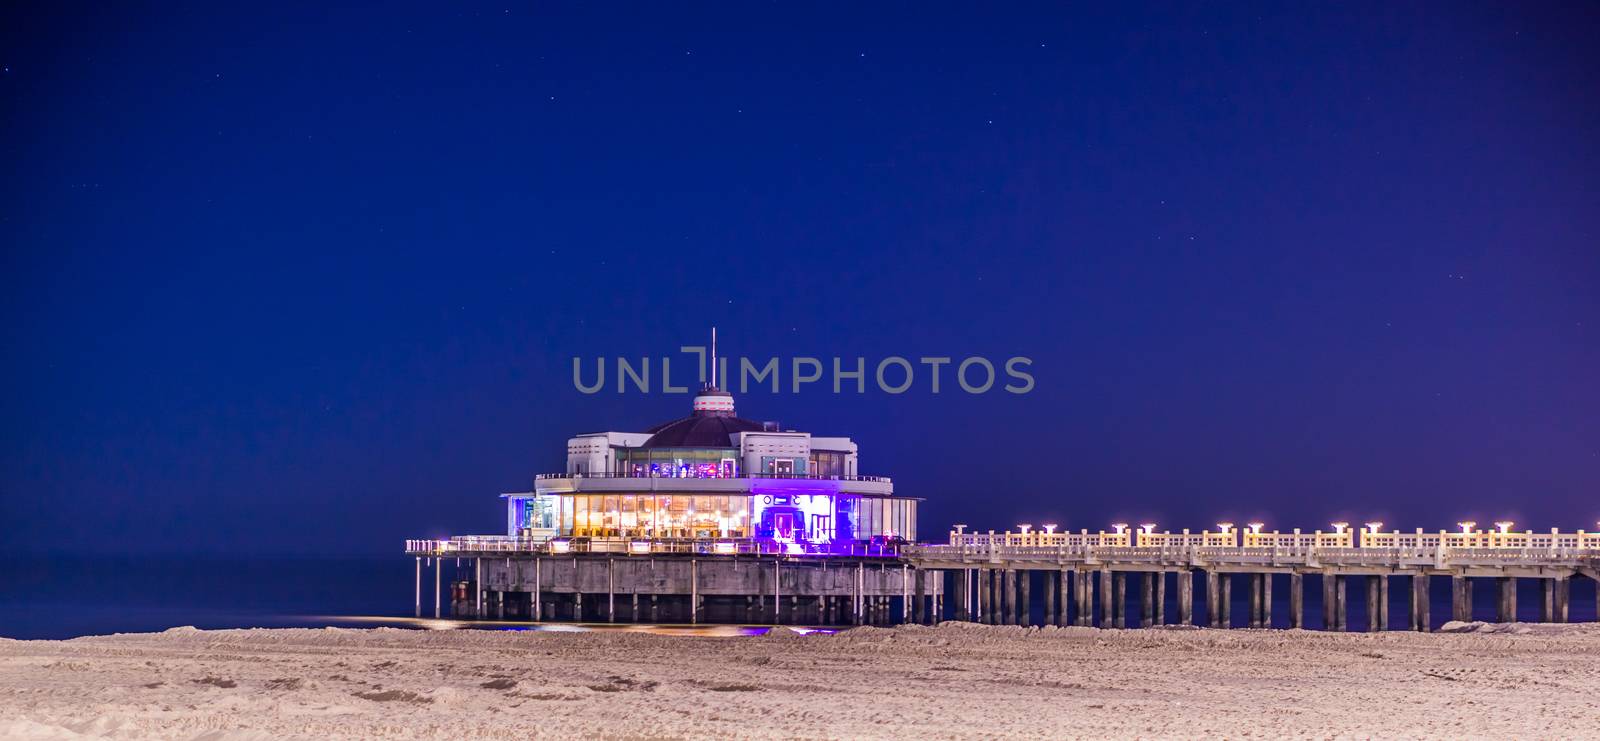 The popular jetty of Blankenberge lighted by night, Architecture of the Belgian coast in Belgium by charlottebleijenberg